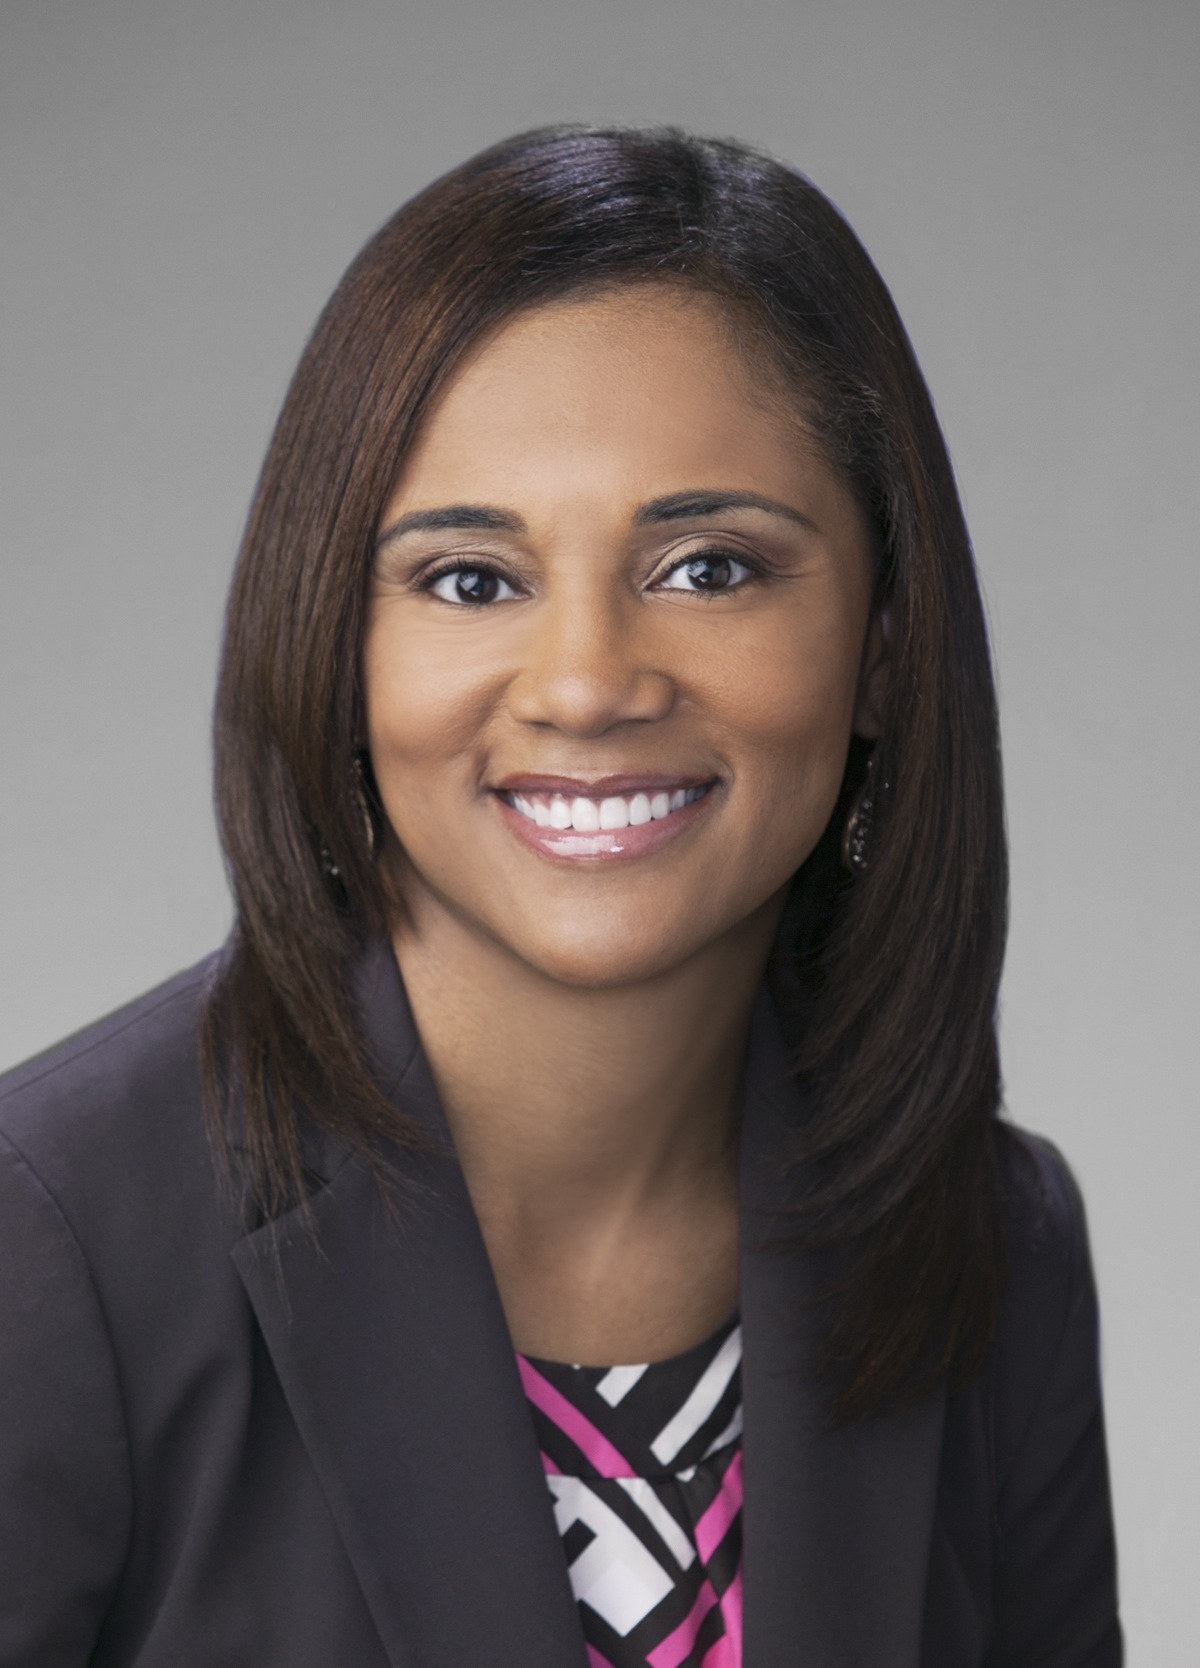 Lanesha Minnix, Flowserve's new Chief Legal Officer (Photo: Business Wire).